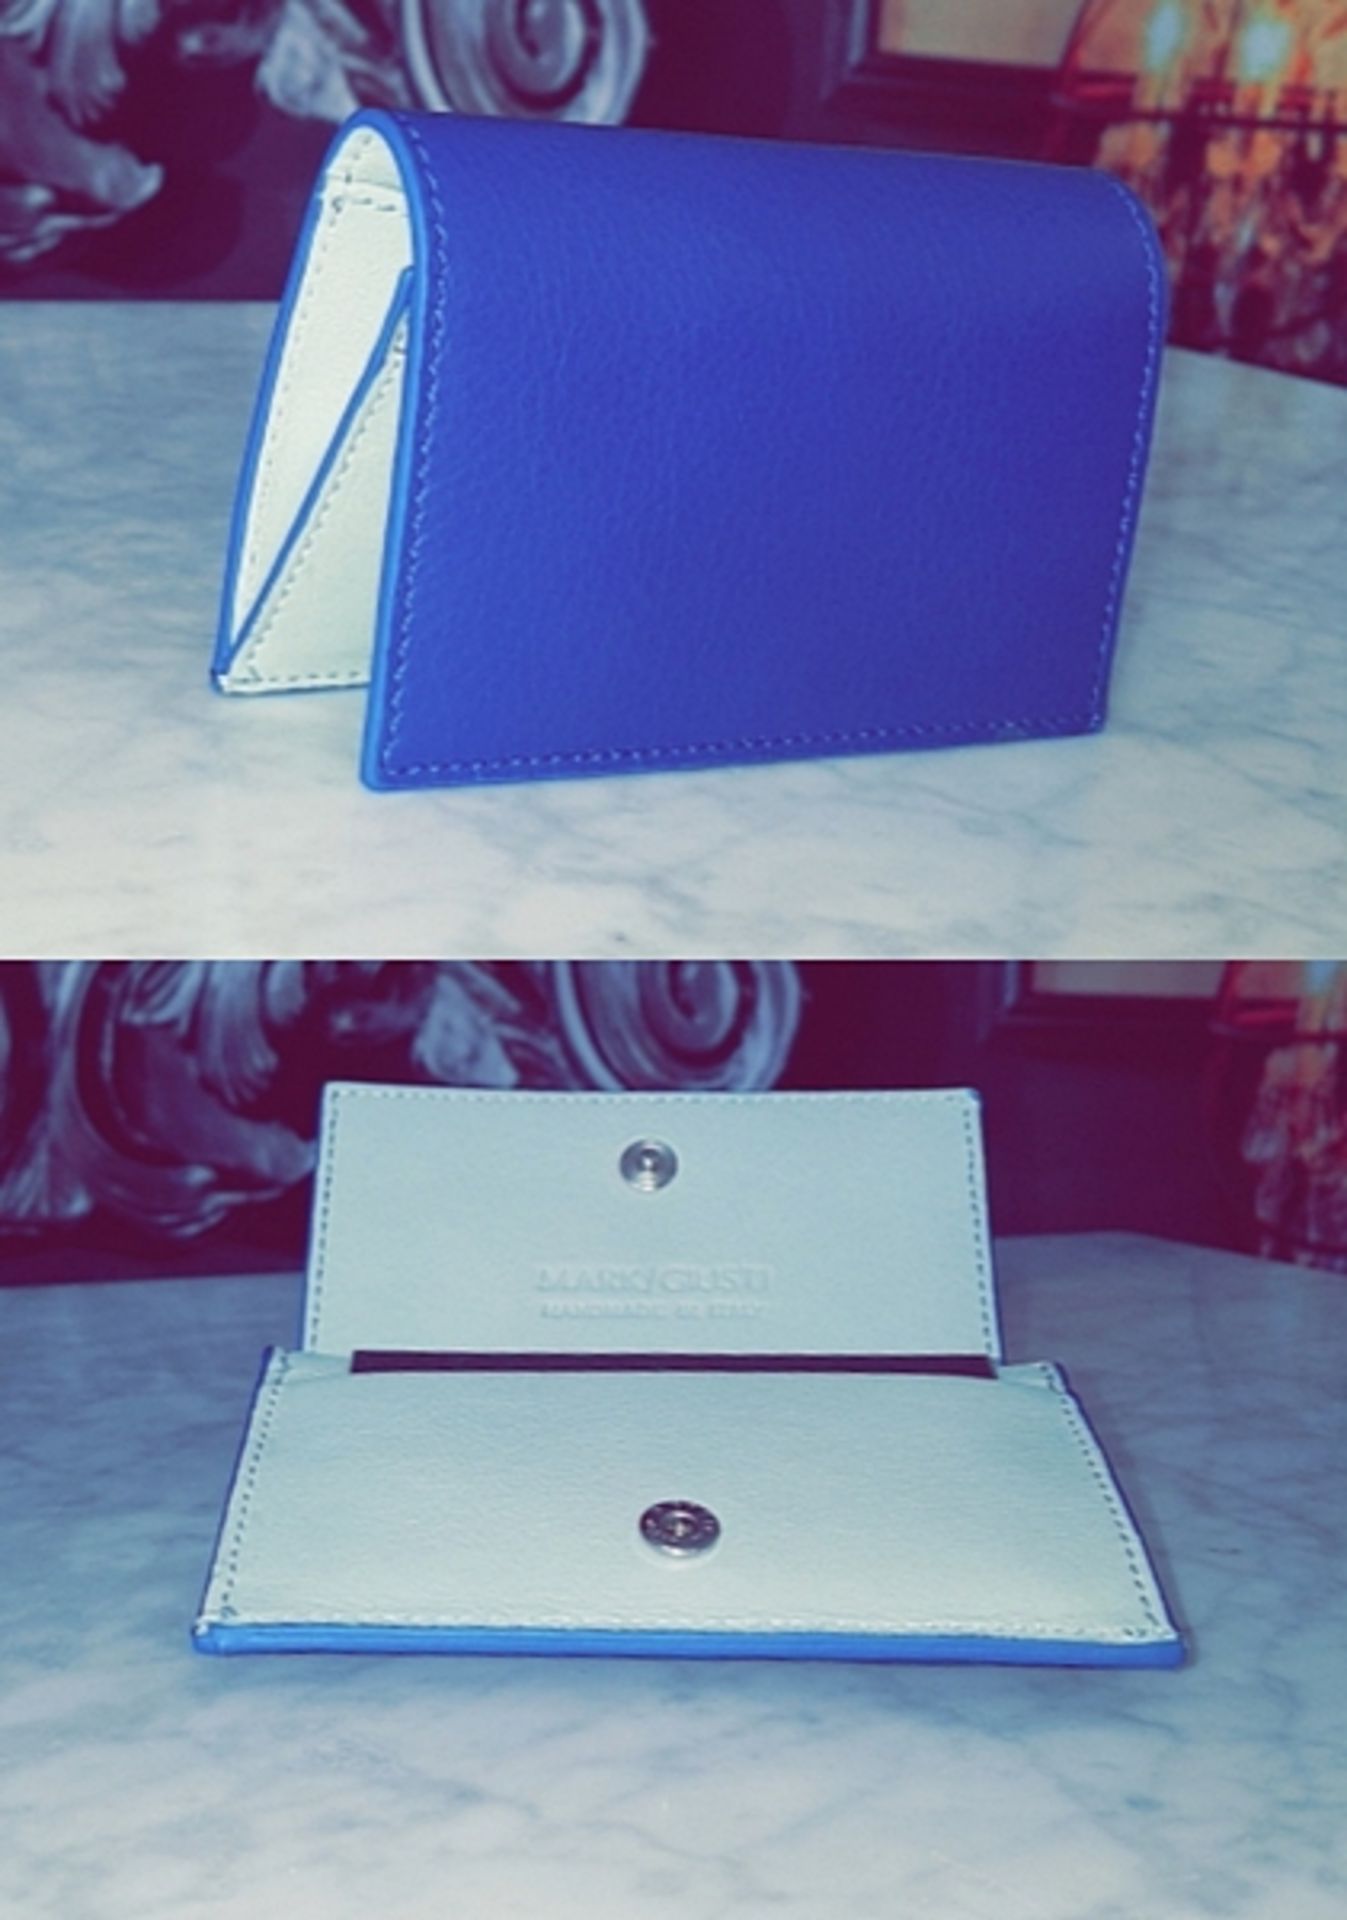 Small Pocket Wallet 100% NAPPA CALF LEATHER FOR BODY AND DETAILS 100% COTTON SATEEN LINING Royal